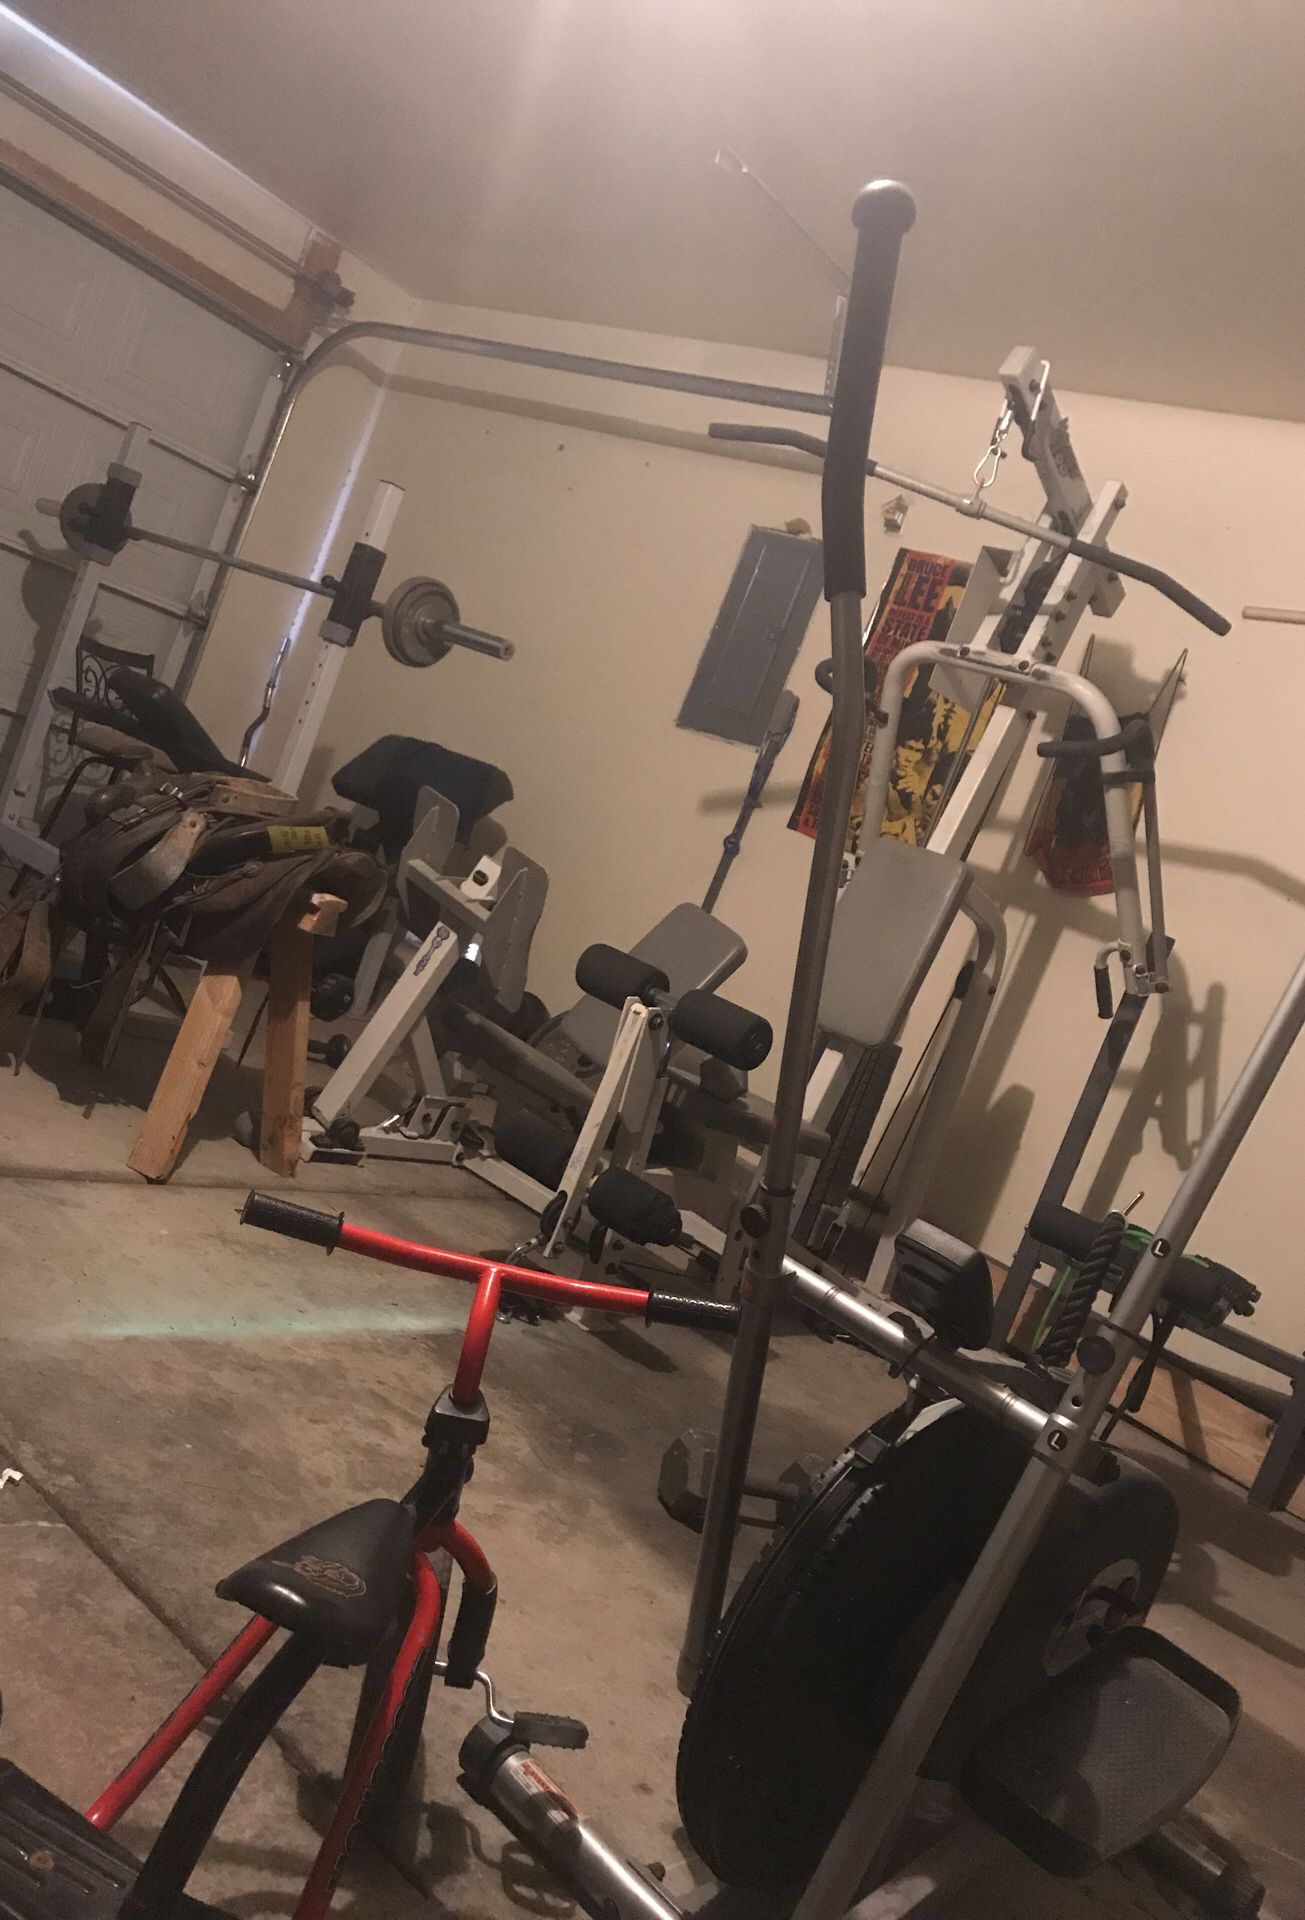 Gym equipment for sale